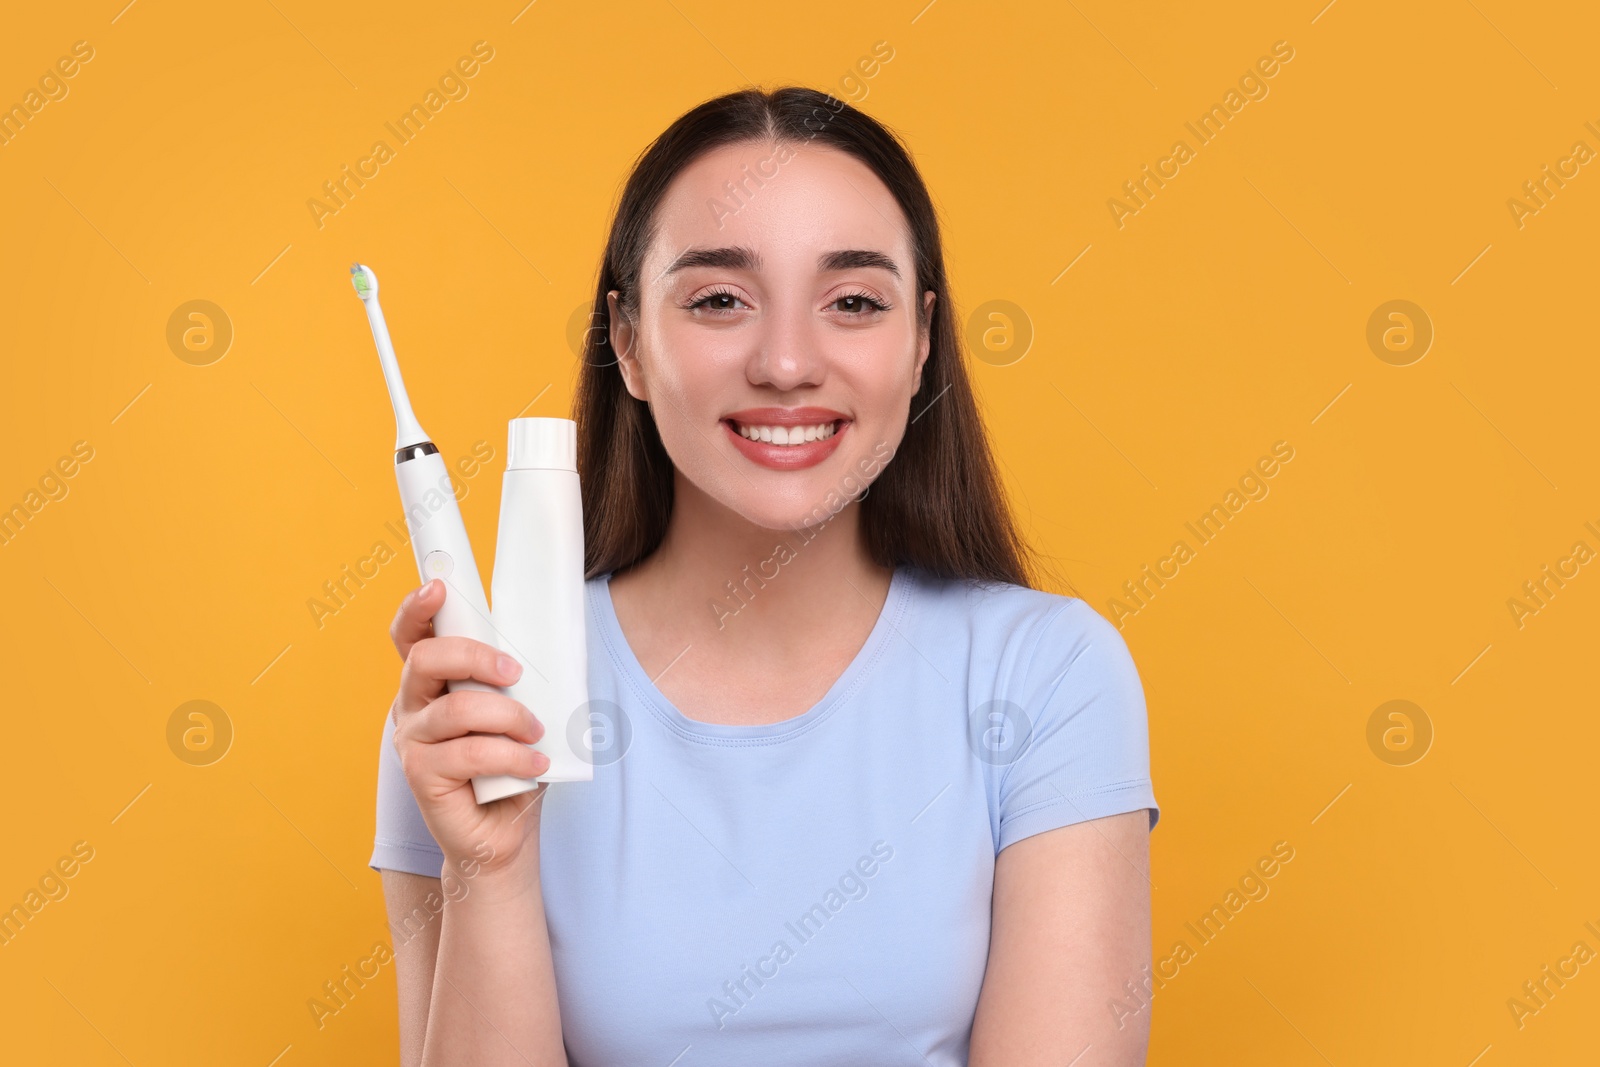 Photo of Happy young woman holding electric toothbrush and tube of toothpaste on yellow background